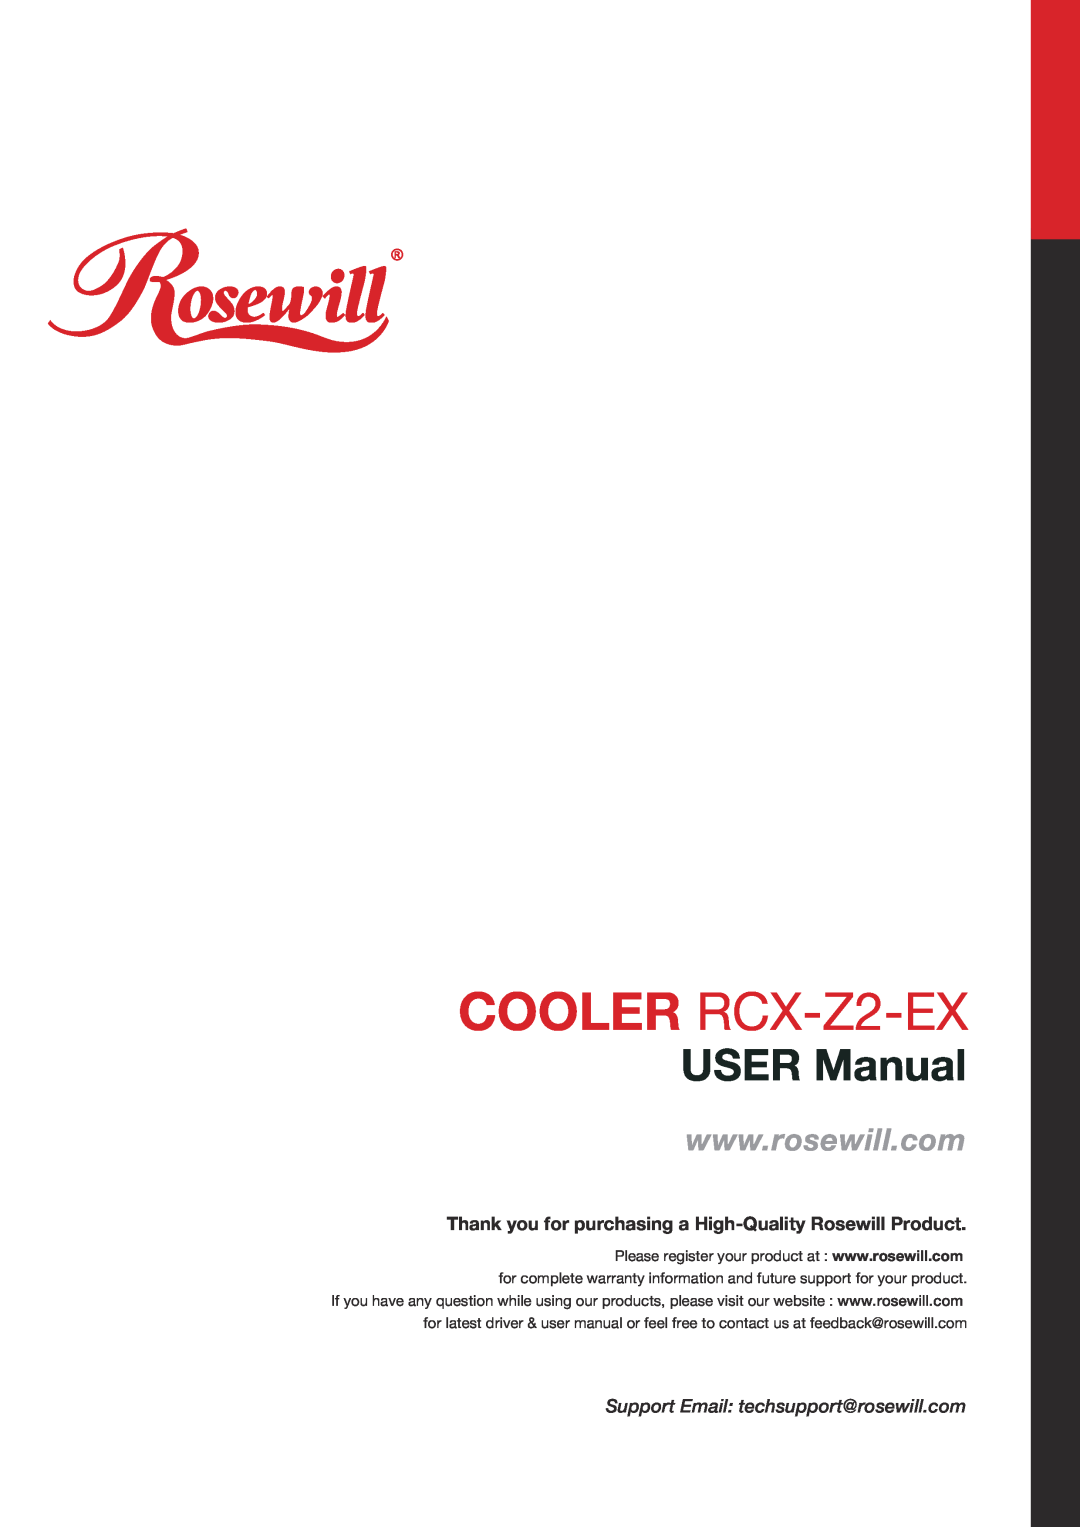 Rosewill user manual COOLER RCX-Z2-EX, USER Manual, Thank you for purchasing a High-Quality Rosewill Product 